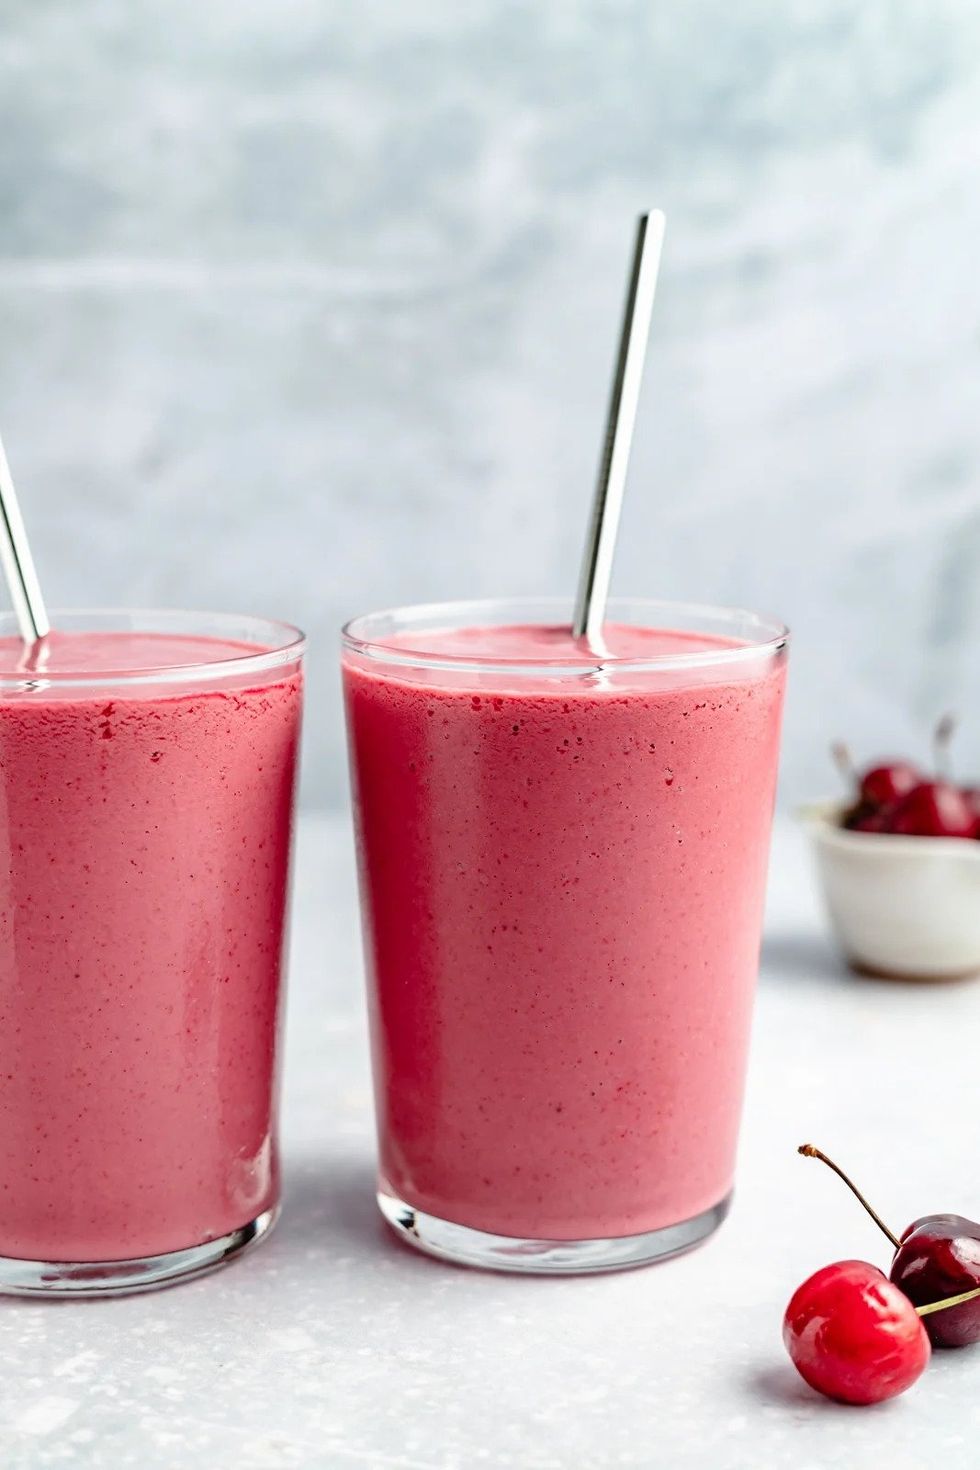 18 High-Protein Smoothies To Keep You Full - Best Protein Smoothies